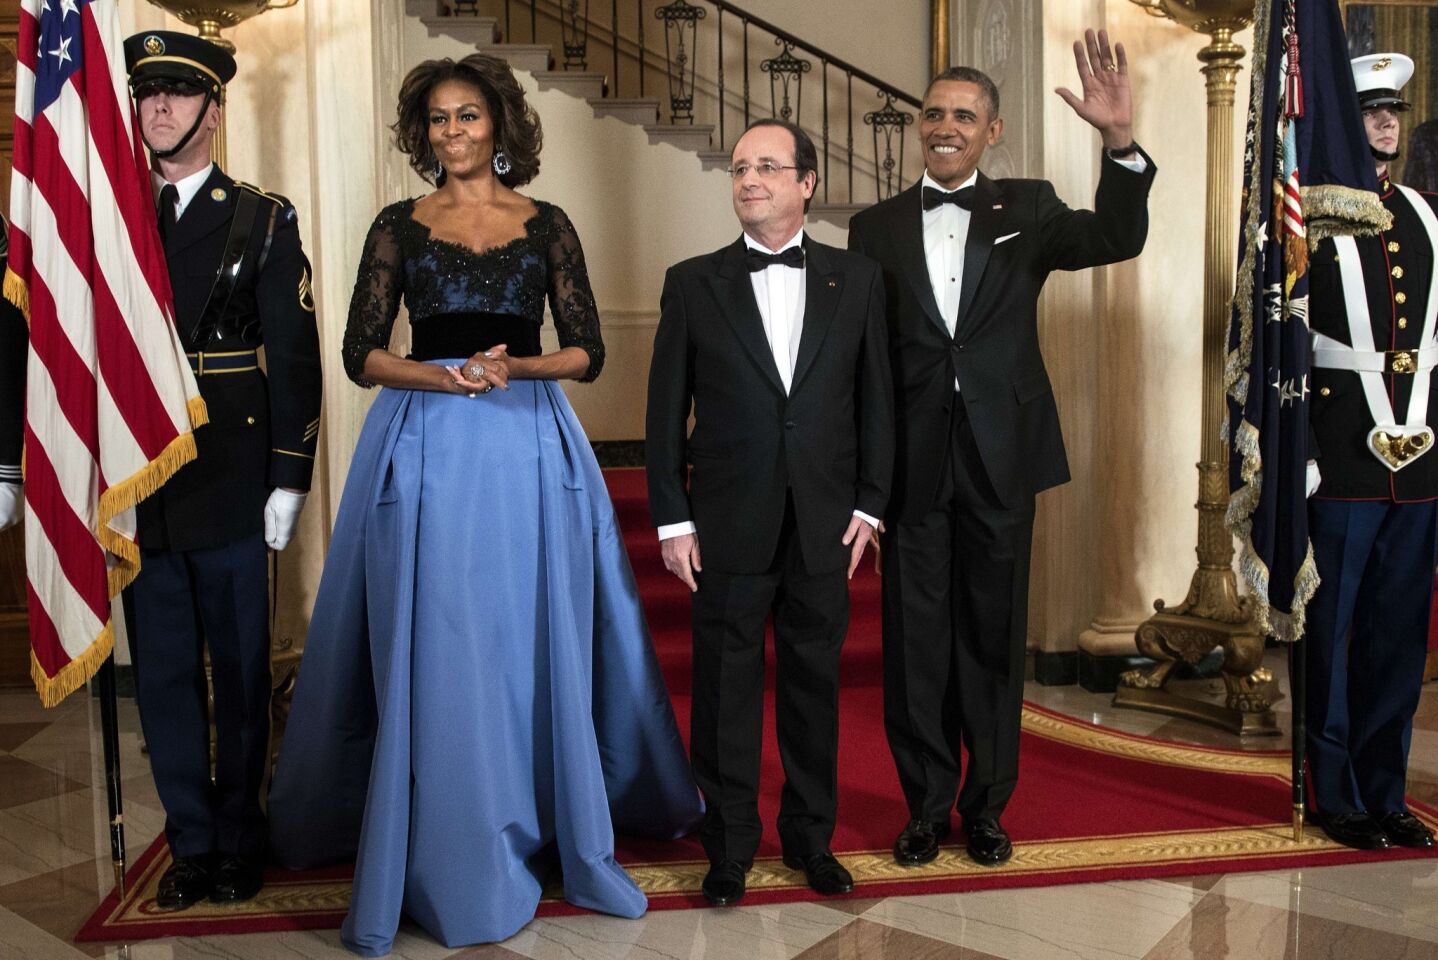 For a state dinner honoring French President Francois Hollande, FLOTUS wore a Carolina Herrera gown with a black lace top and full taffeta skirt in periwinkle bue.